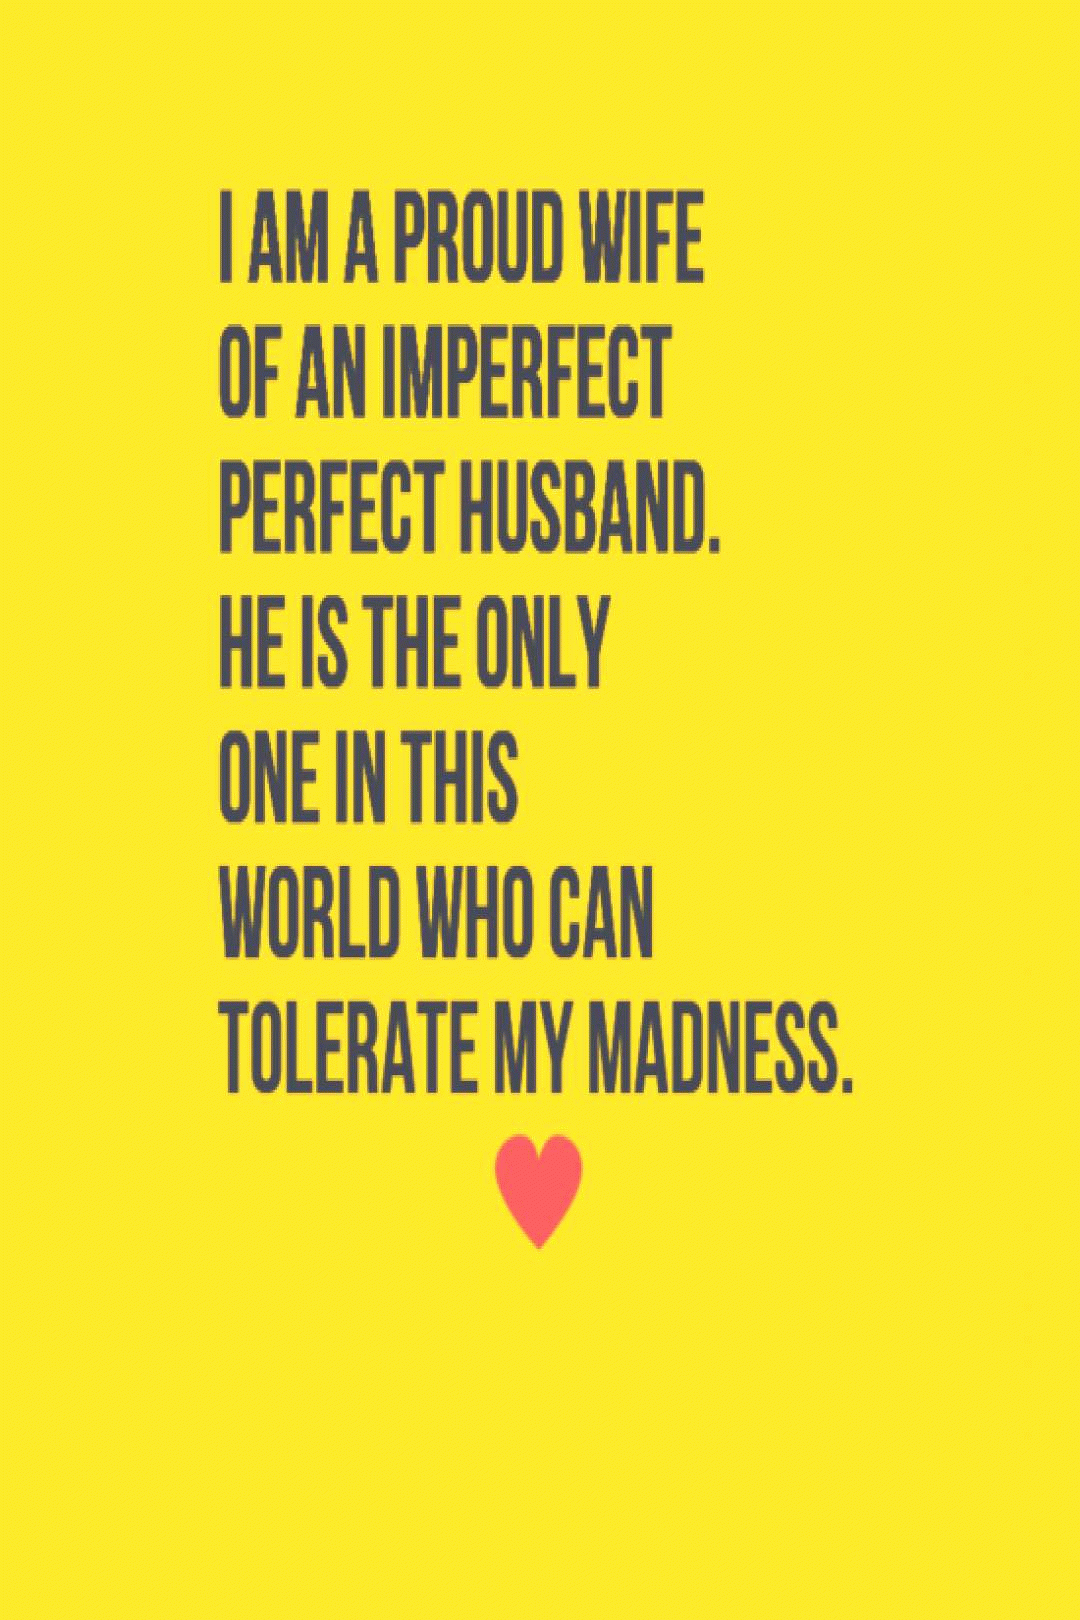 i love my husband quotes in 2020 husband quotes funny small